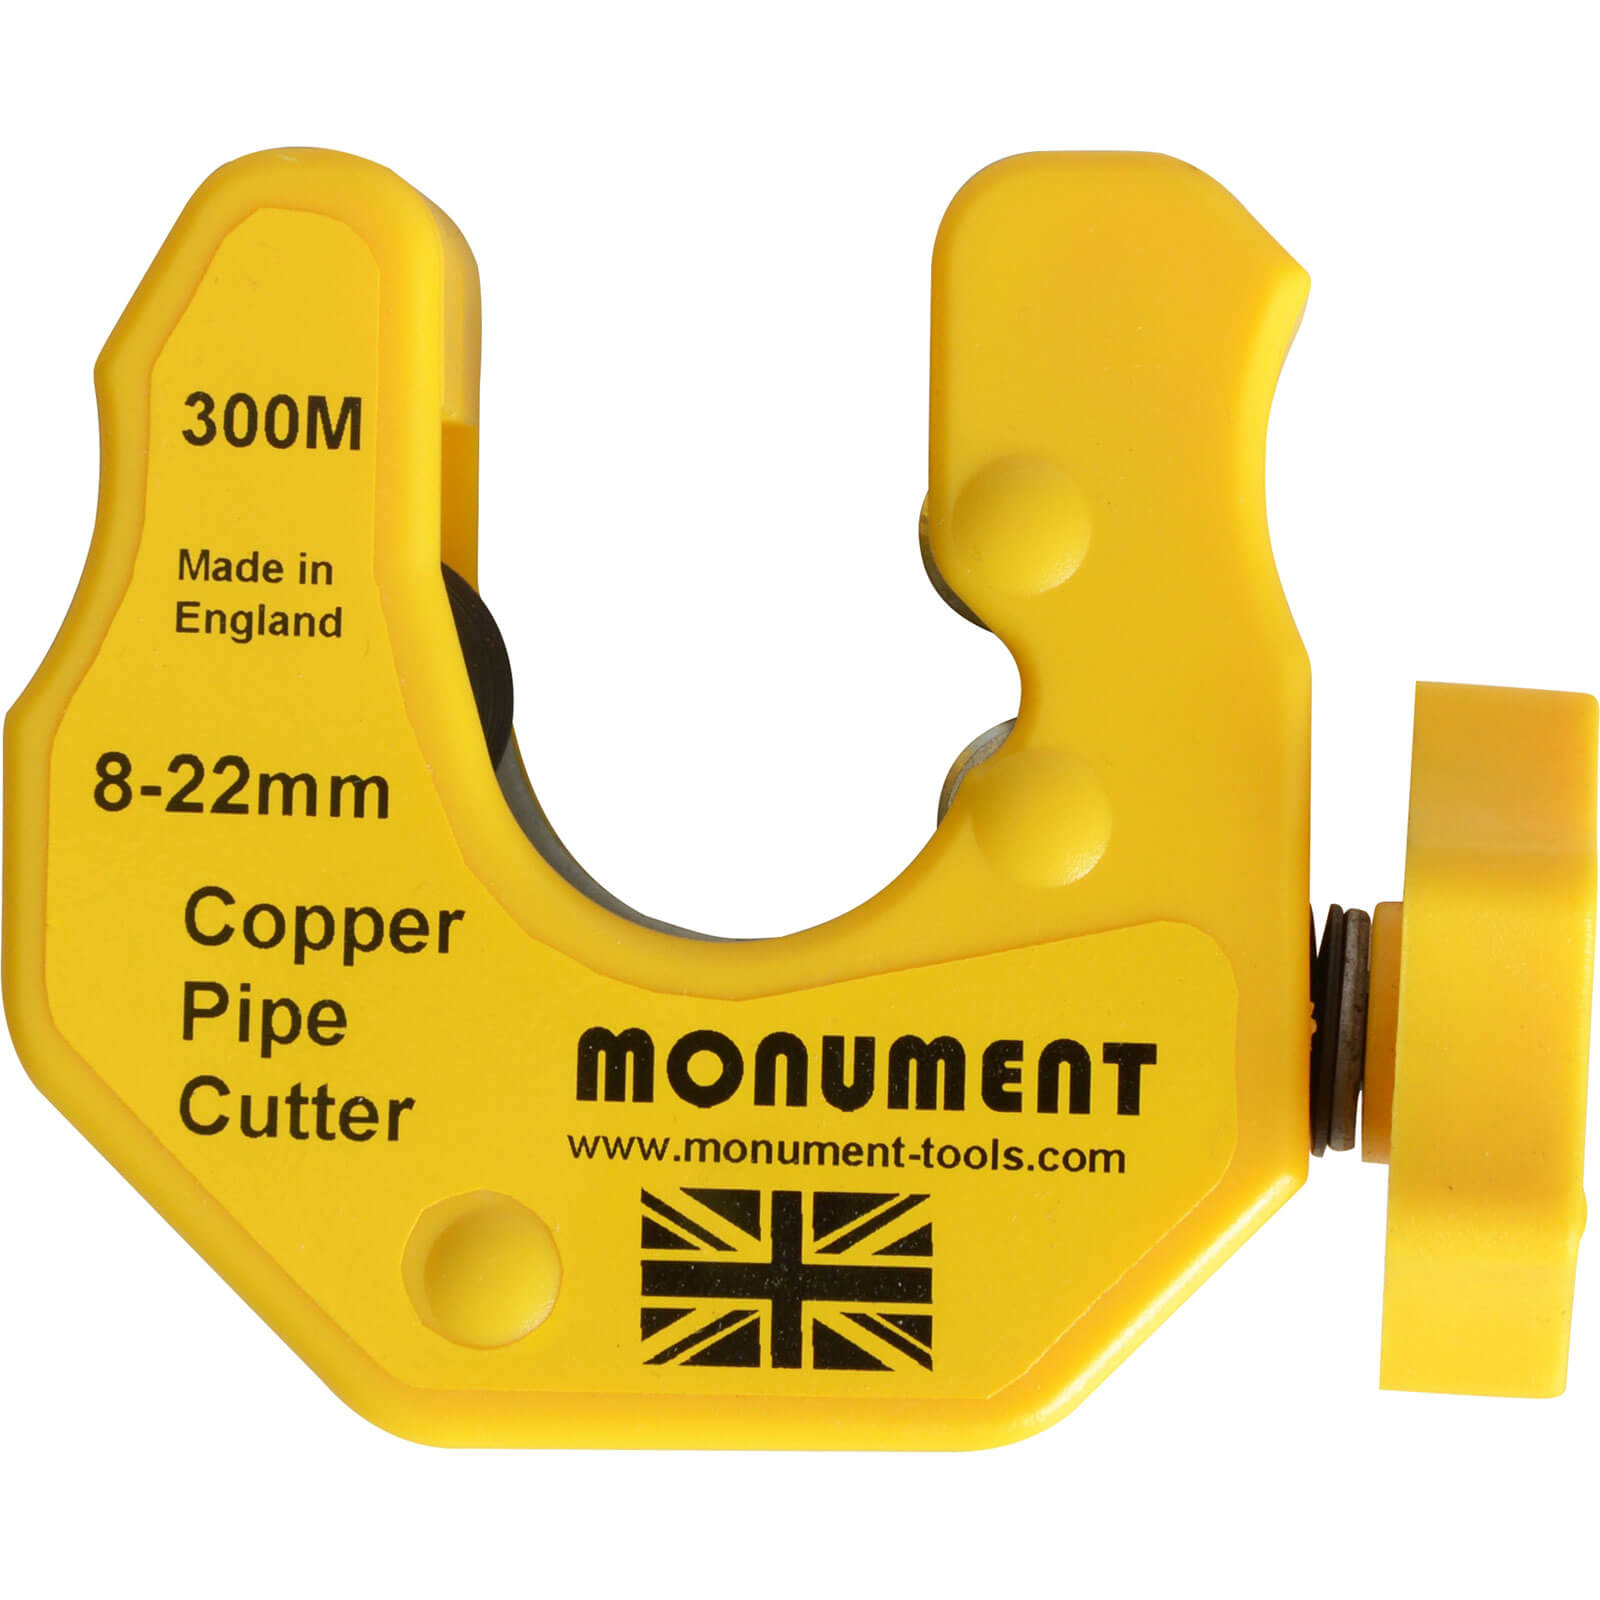 Monument 300M Semi Automatic Pipe Cutter for 8 - 22mm Copper Pipe